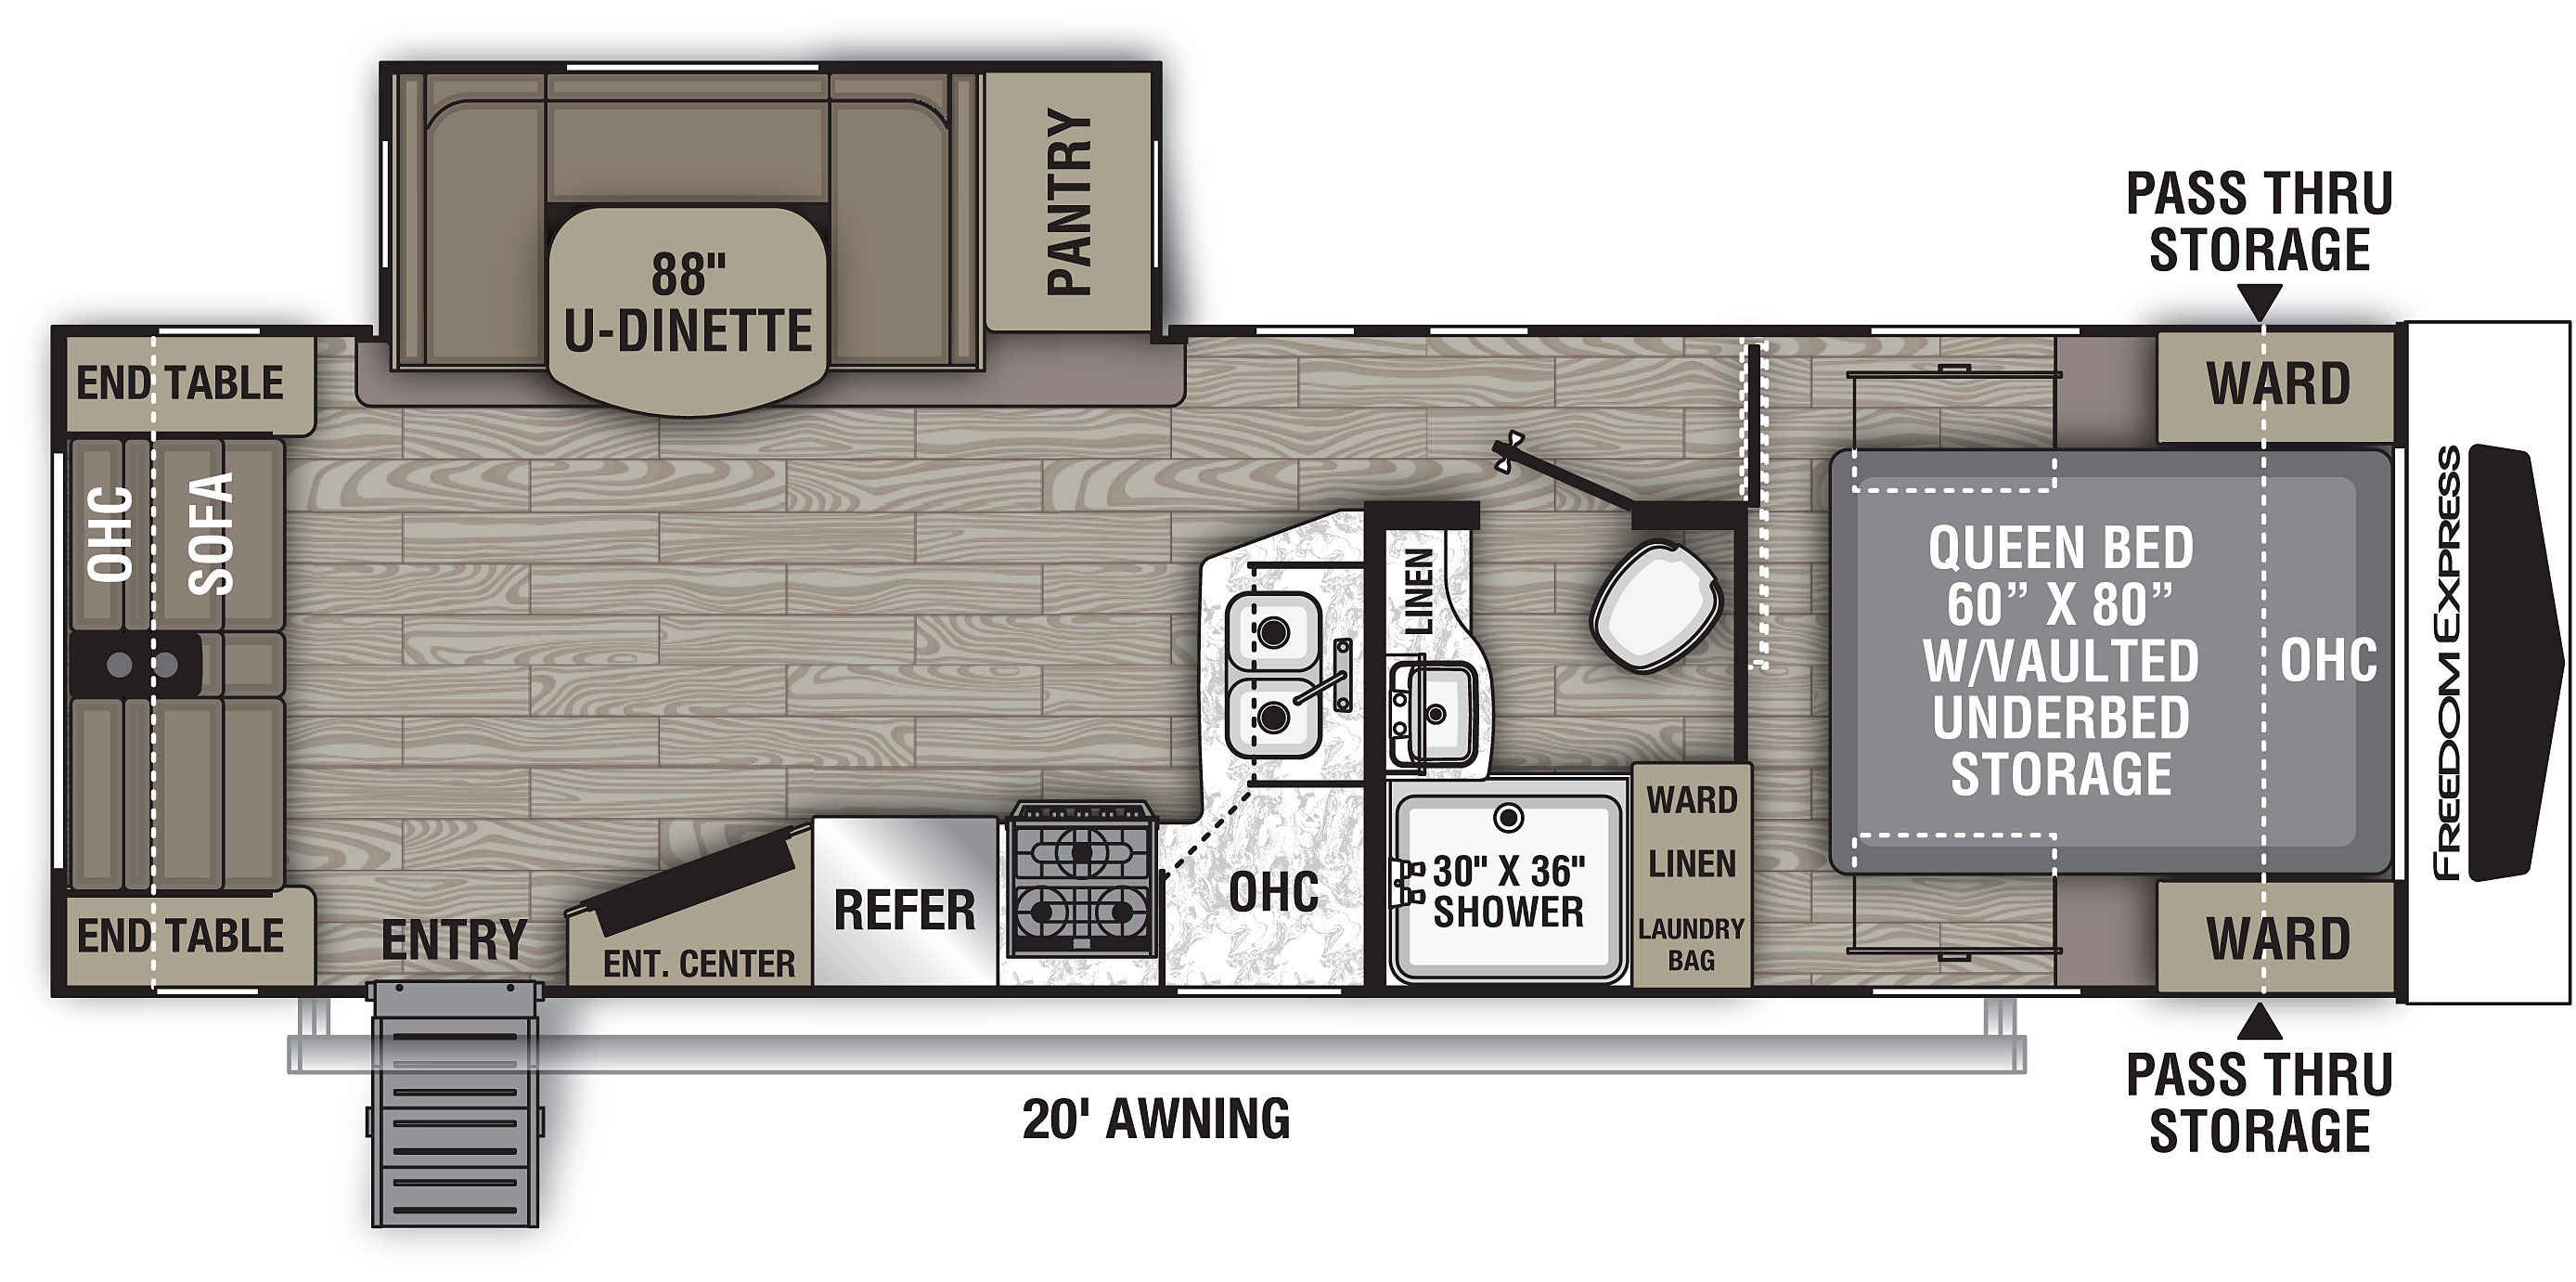 The 279RLDS has one slide out on the off-door side and one entry door on the door side. Interior layout from front to back; front bedroom with foot facing queen bed, vaulted under-bed storage, cabinets overhead, wardrobes on either side of the bed; door side bathroom; kitchen living dining area on the door side; double bowl sink, overhead cabinets, stove cook top, refrigerator and entertainment center; slide out on the off-door side containing a U-shaped dinette and pantry; sofa located at the rear with end tables on either side and overhead cabinets. 